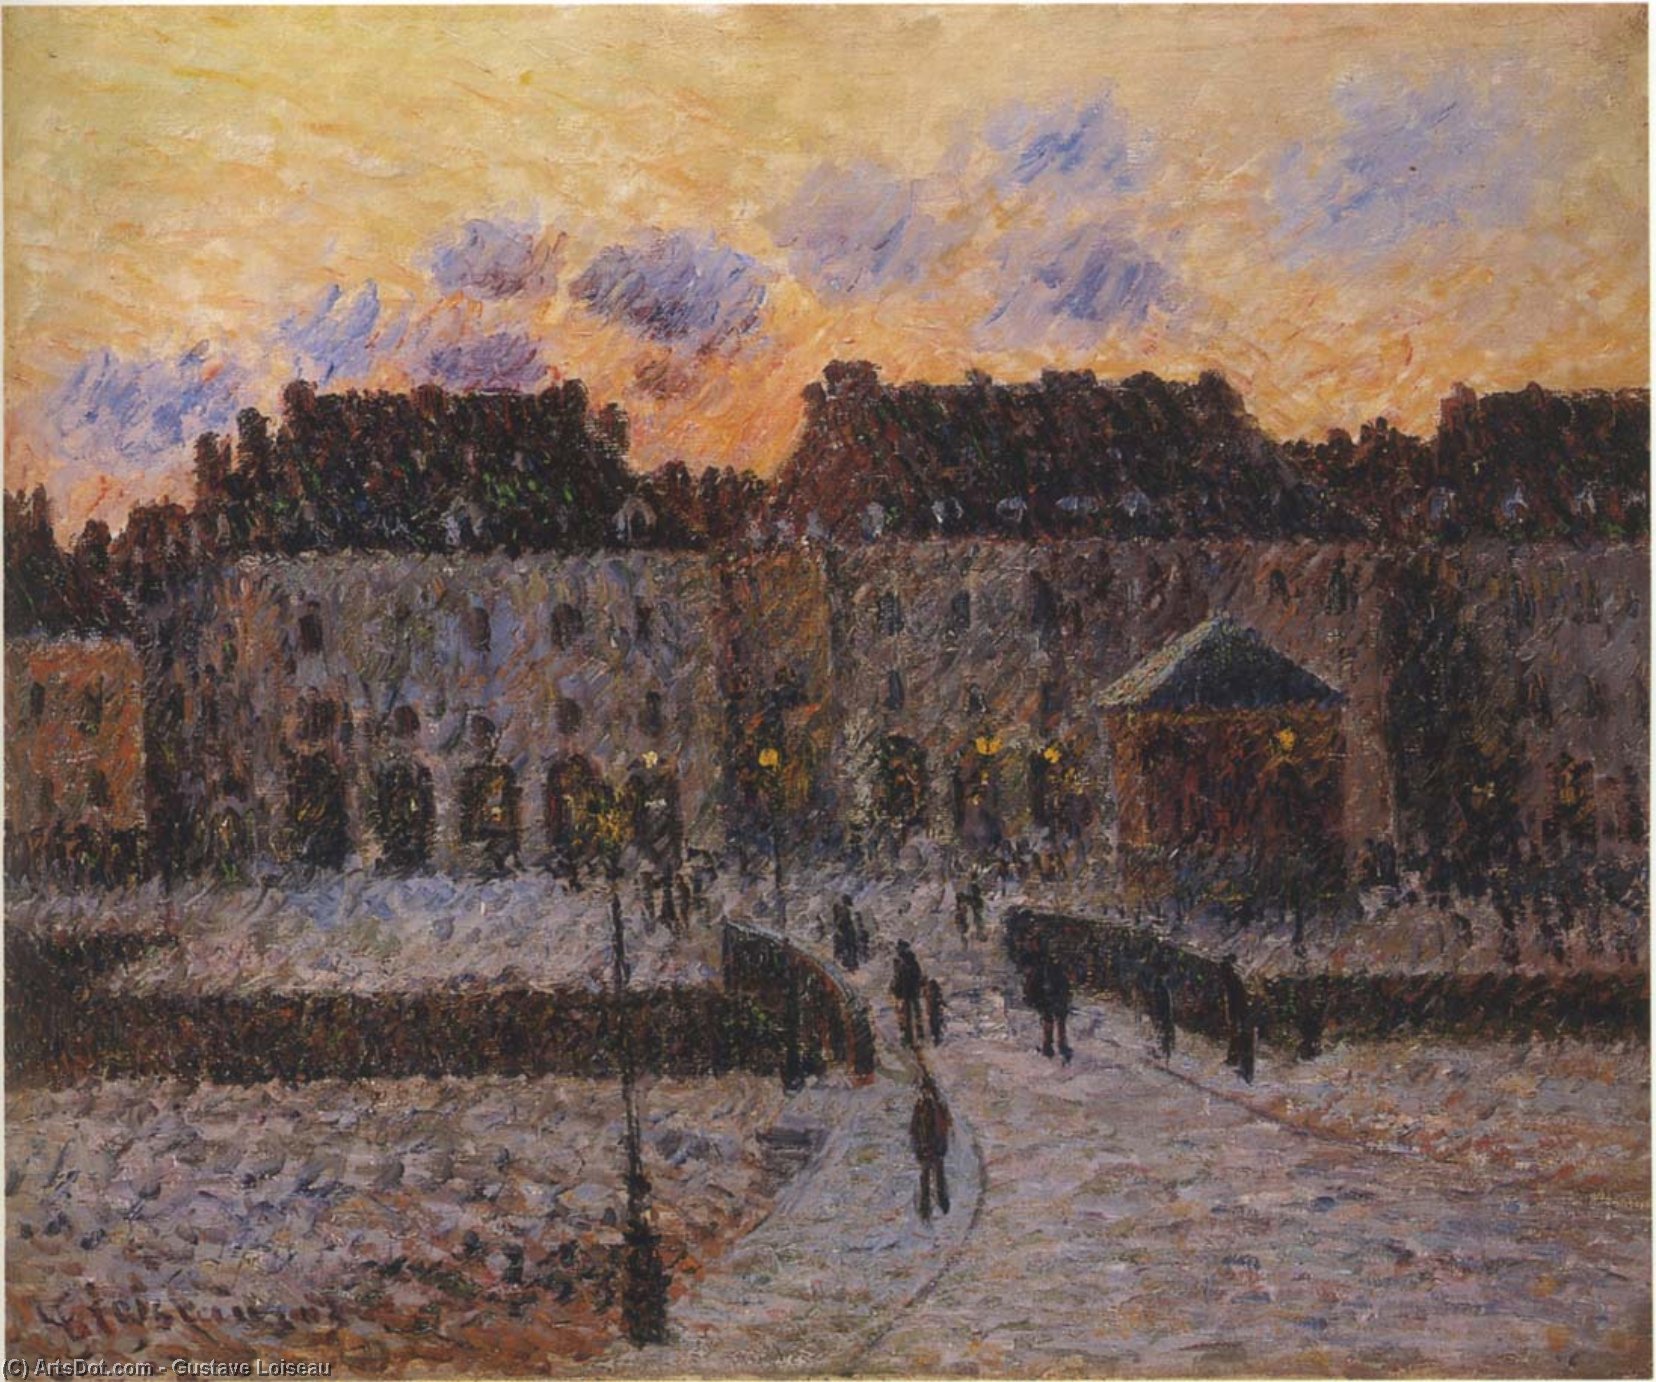 Buy Museum Art Reproductions Fish market at the Port of Dieppe, 1903 by Gustave Loiseau (1865-1935, France) | ArtsDot.com